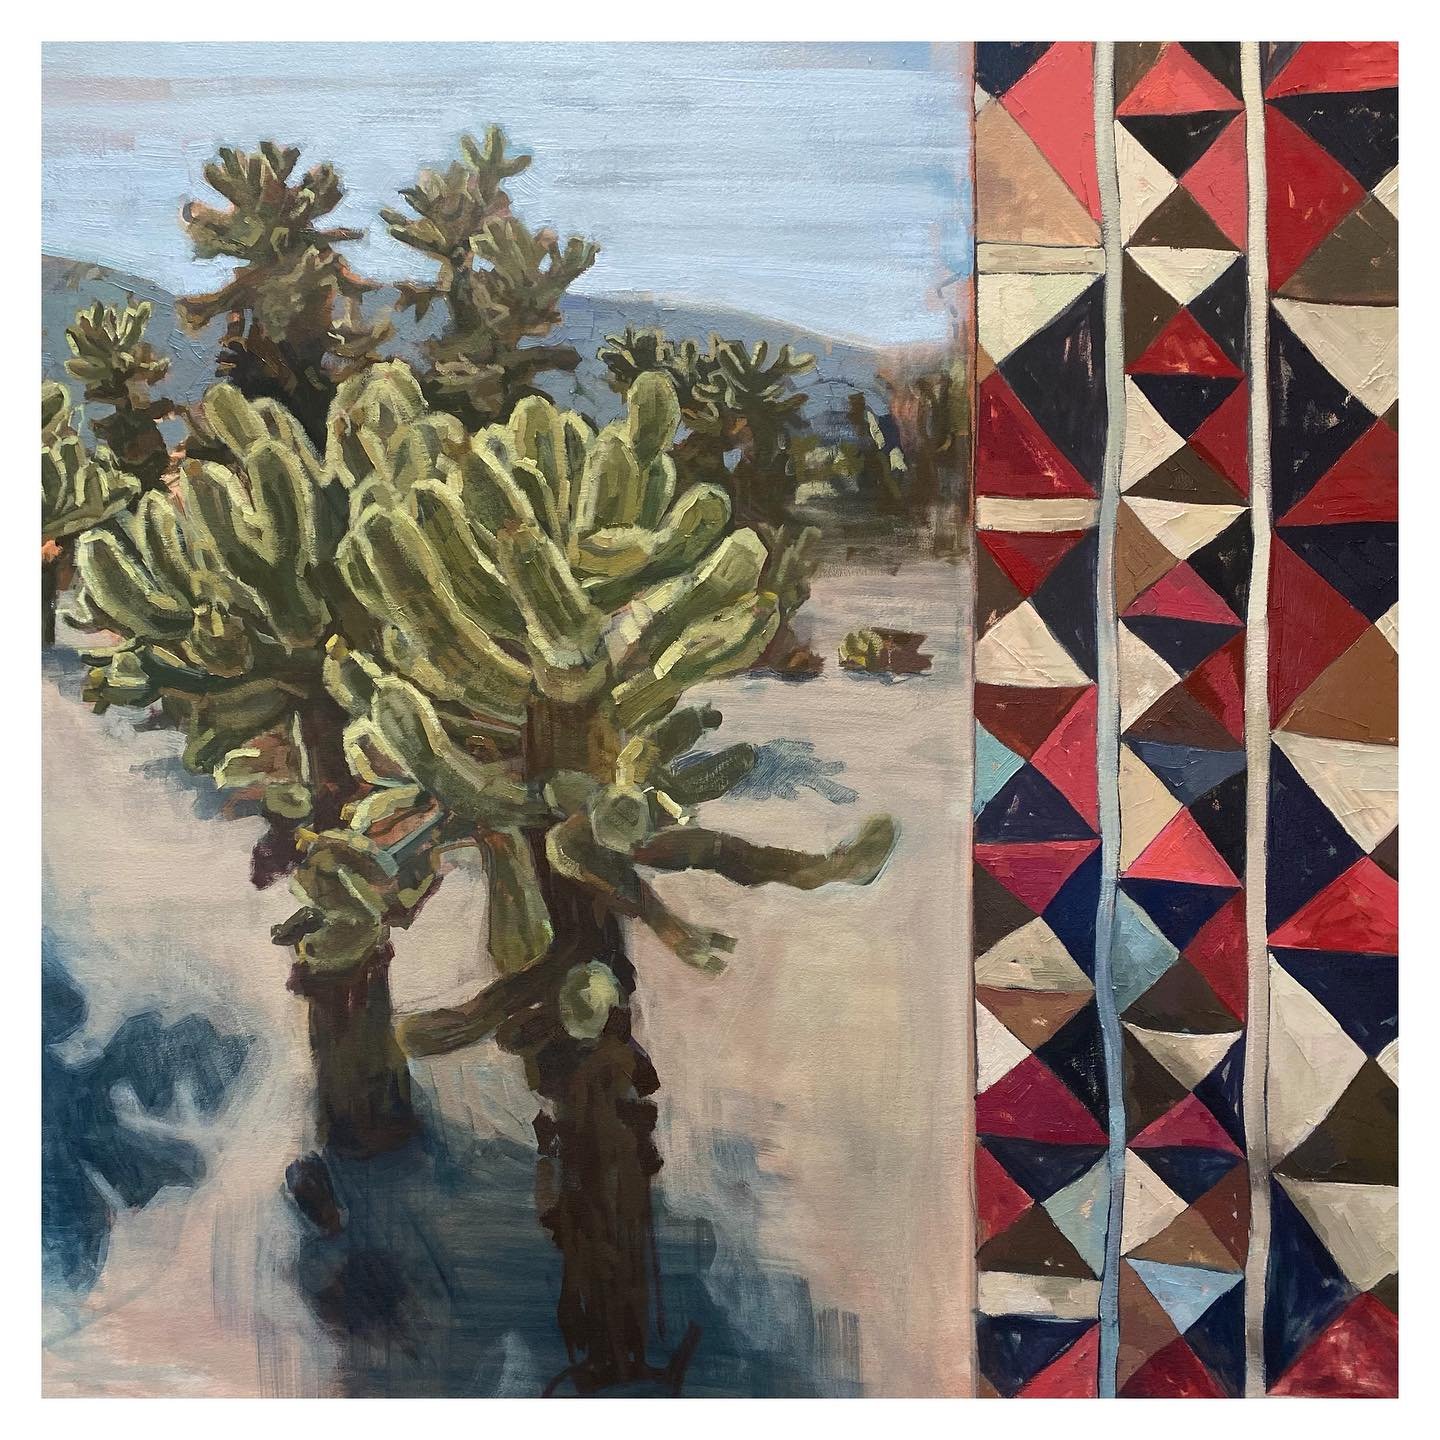 My newest painting &ldquo;The Cactus and The Quilt&rdquo; &bull; 76&rdquo;x 47&rdquo; when stretched&bull; acrylic and oil on canvas &bull; I have been thinking on a series called Memory Stitchers, taking two or more of my memories and laying them si